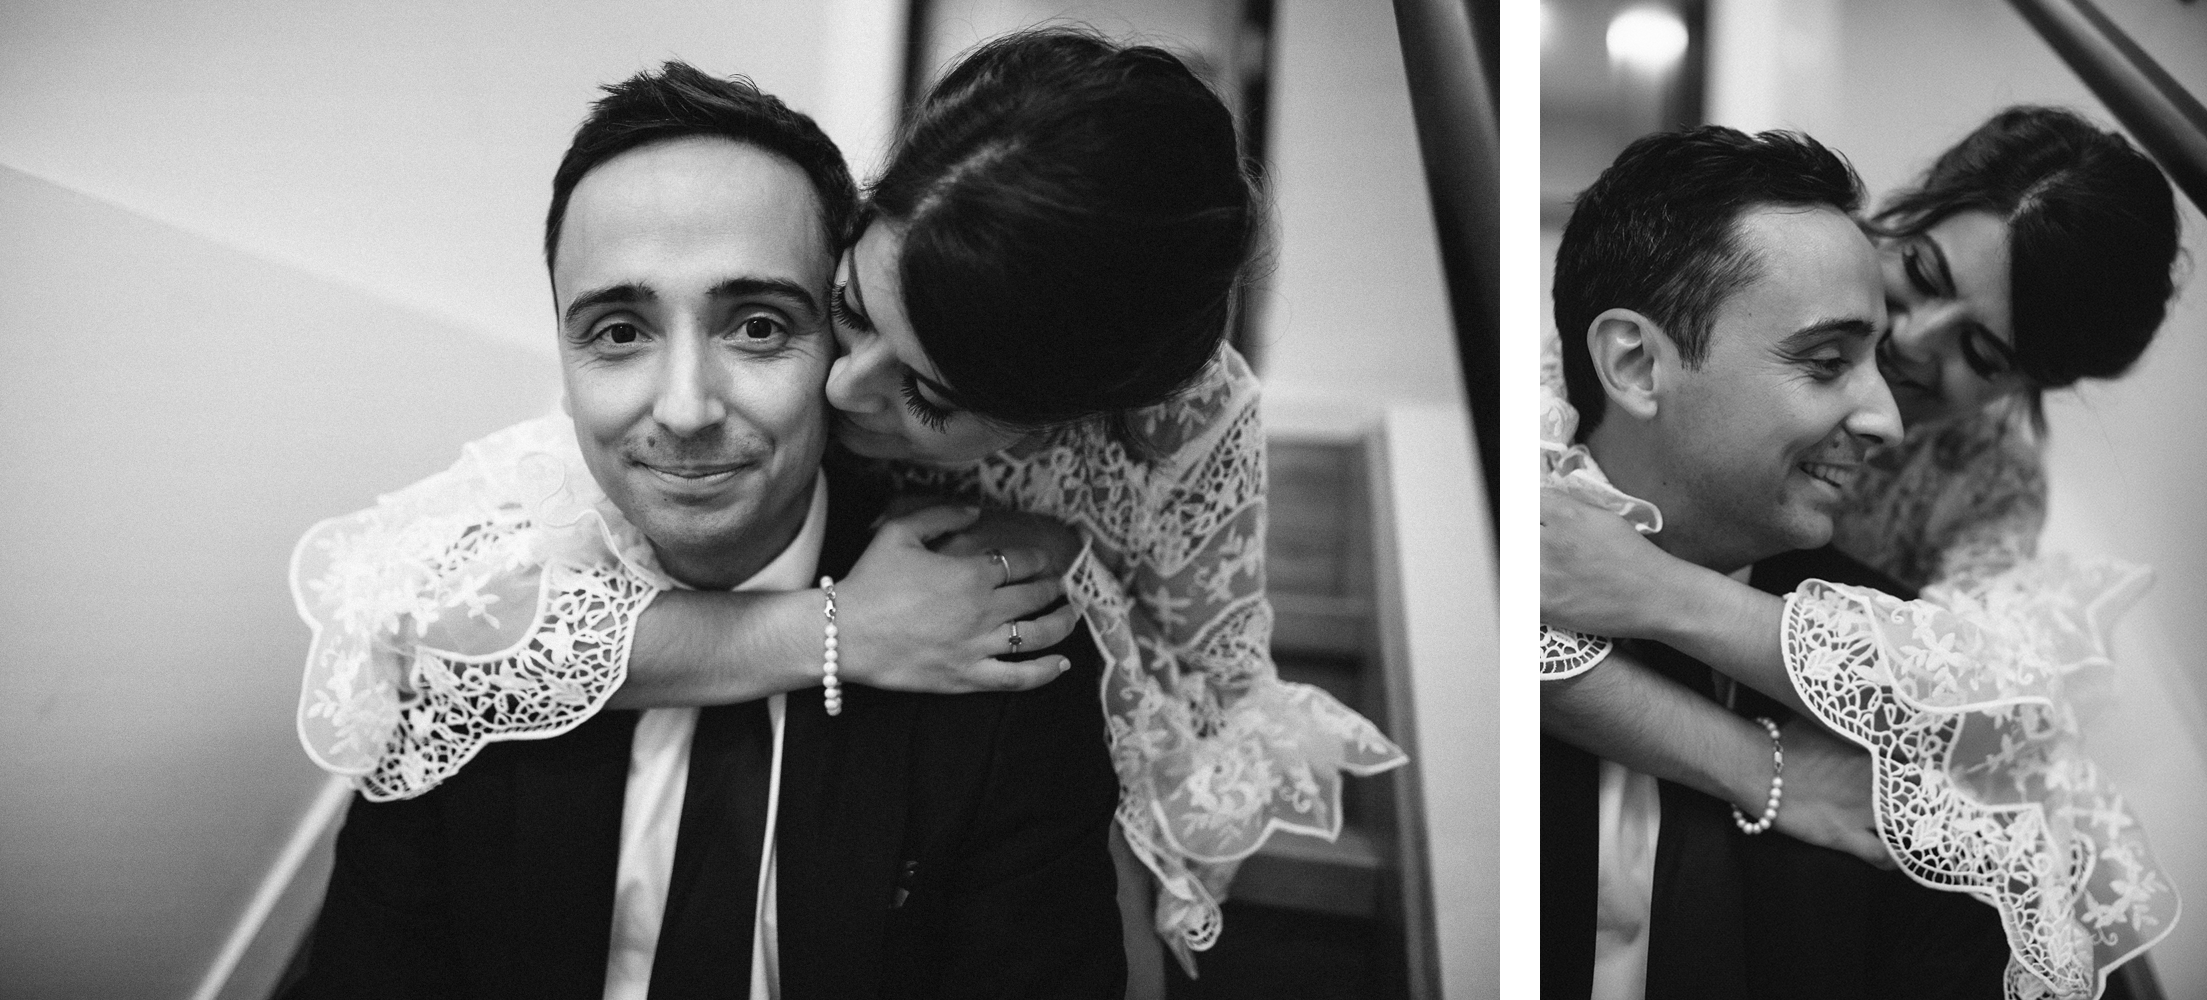 151-Intimate-Elopement-at-Drake-Hotel-Wedding-Photography-in-Toronto-30.PNG